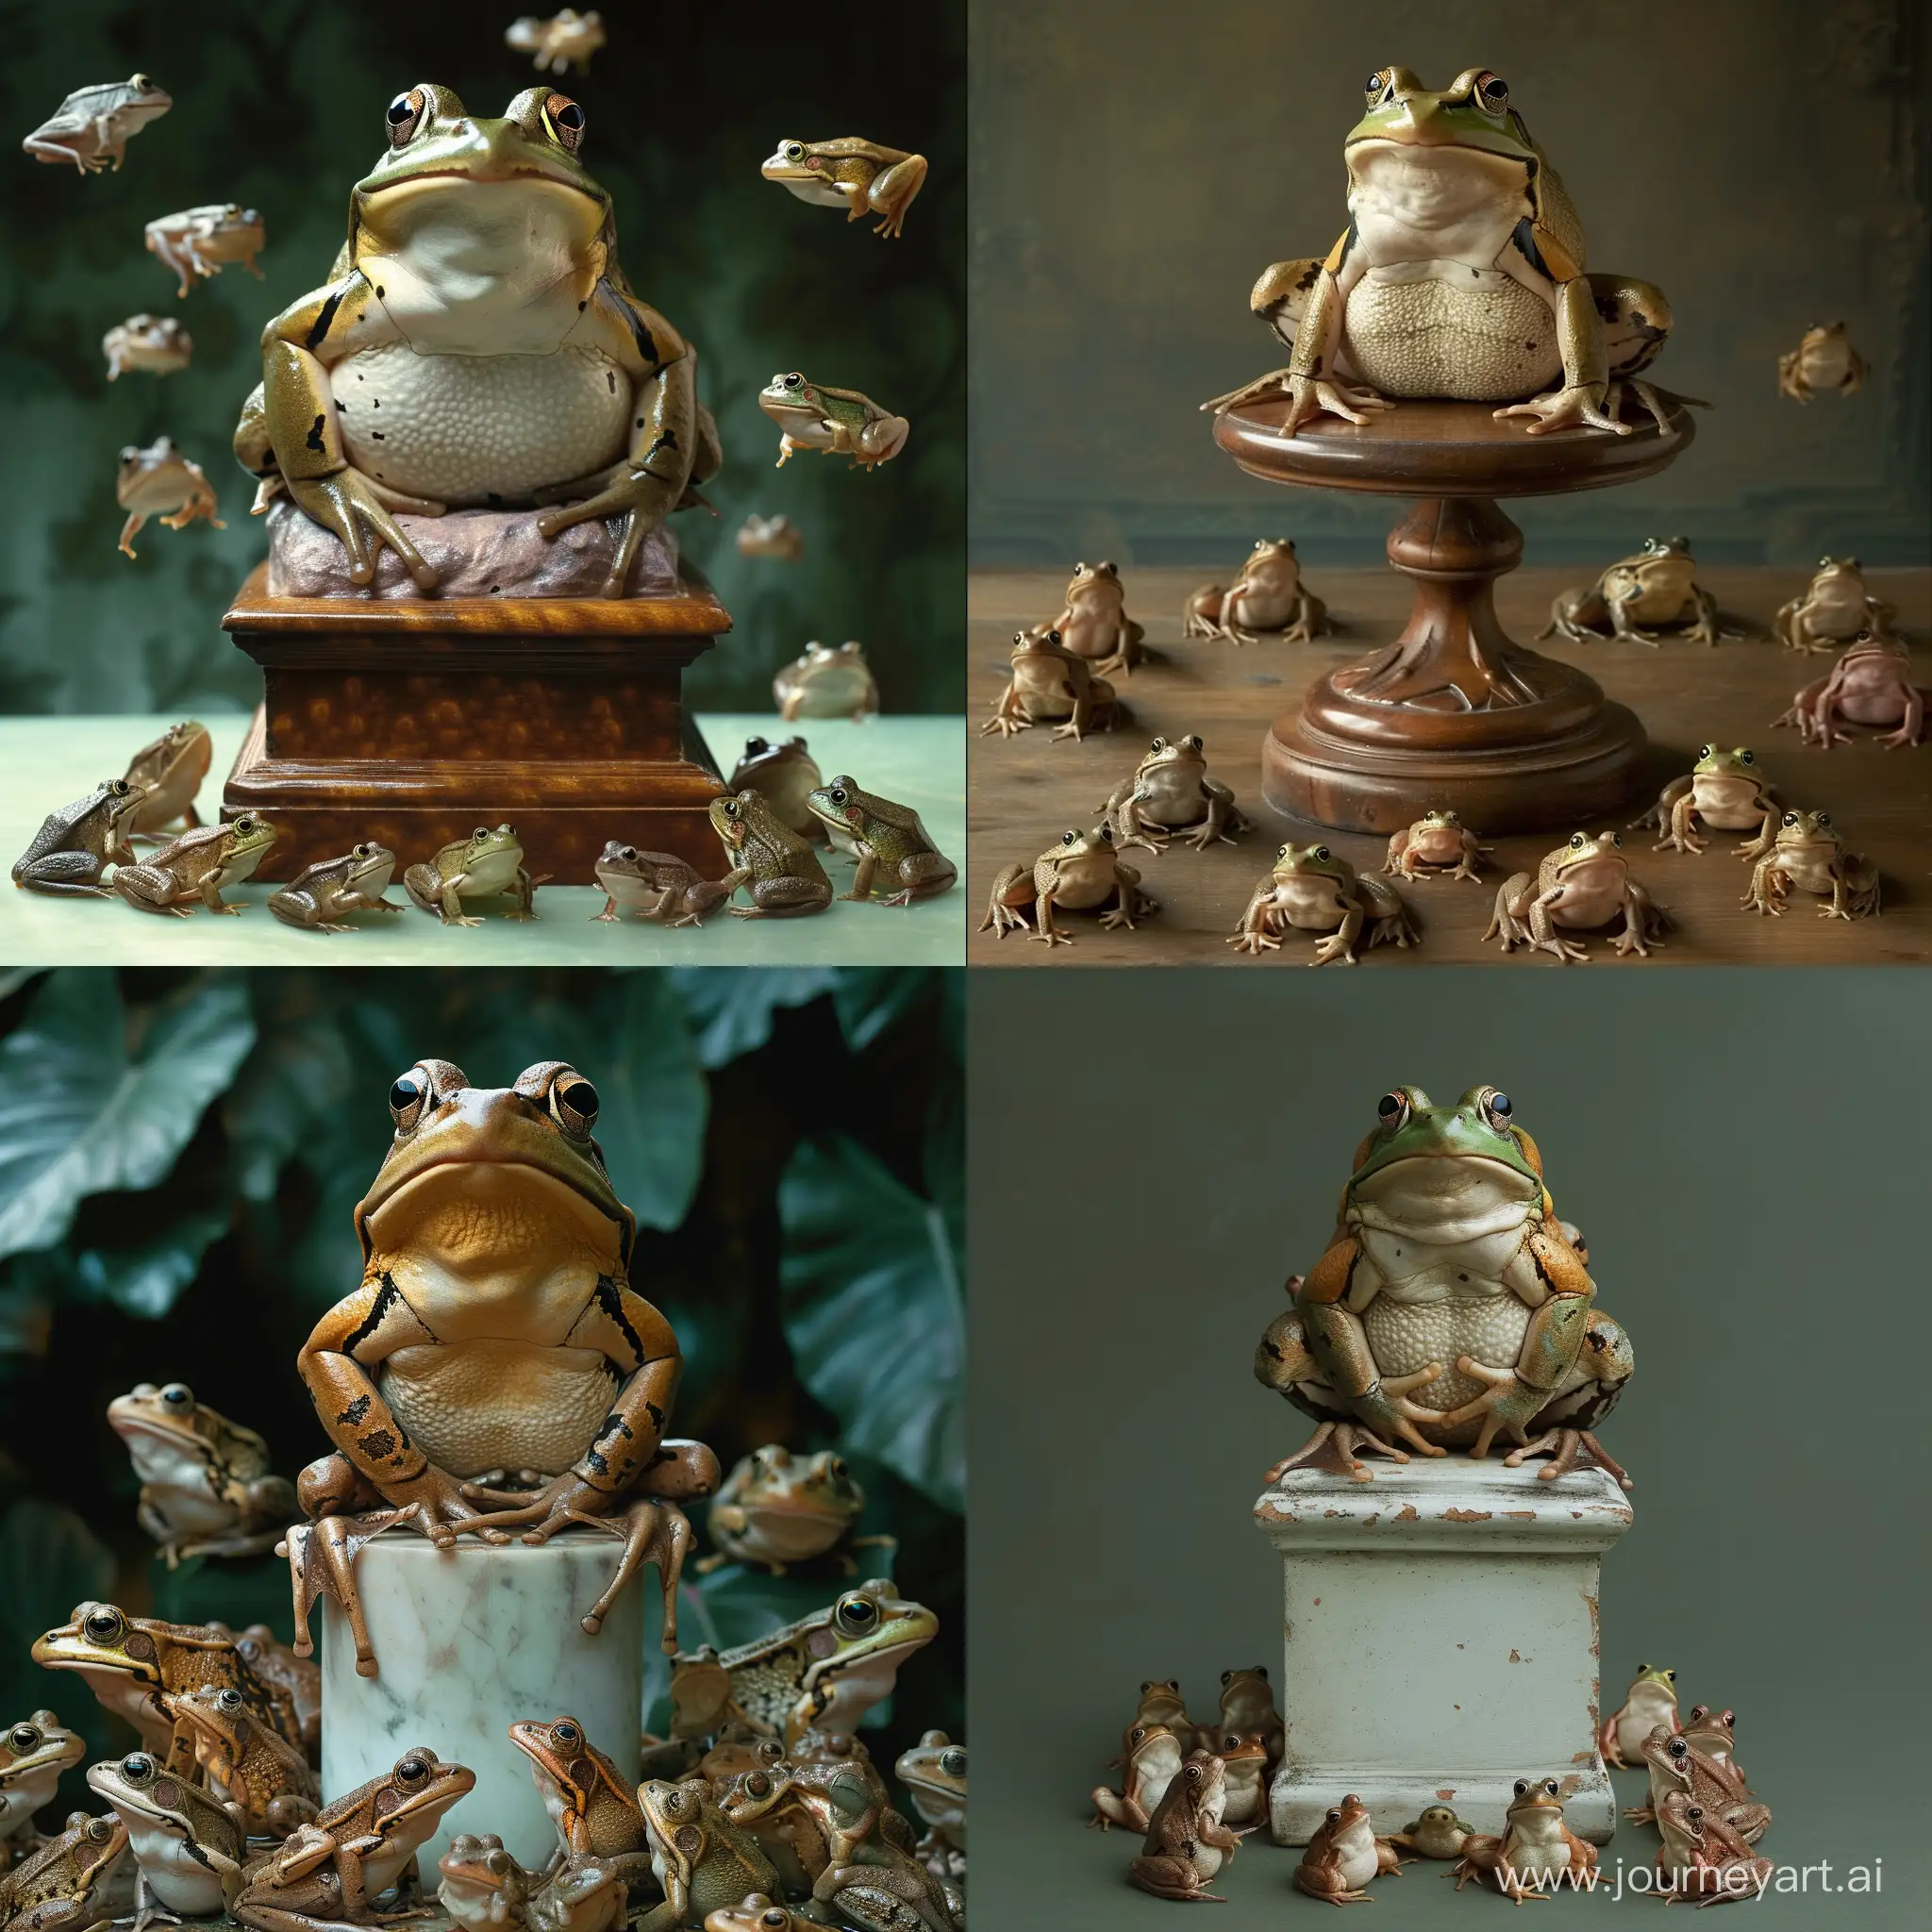 Majestic-Frog-on-Pedestal-Amidst-Tiny-Frogs-Photo